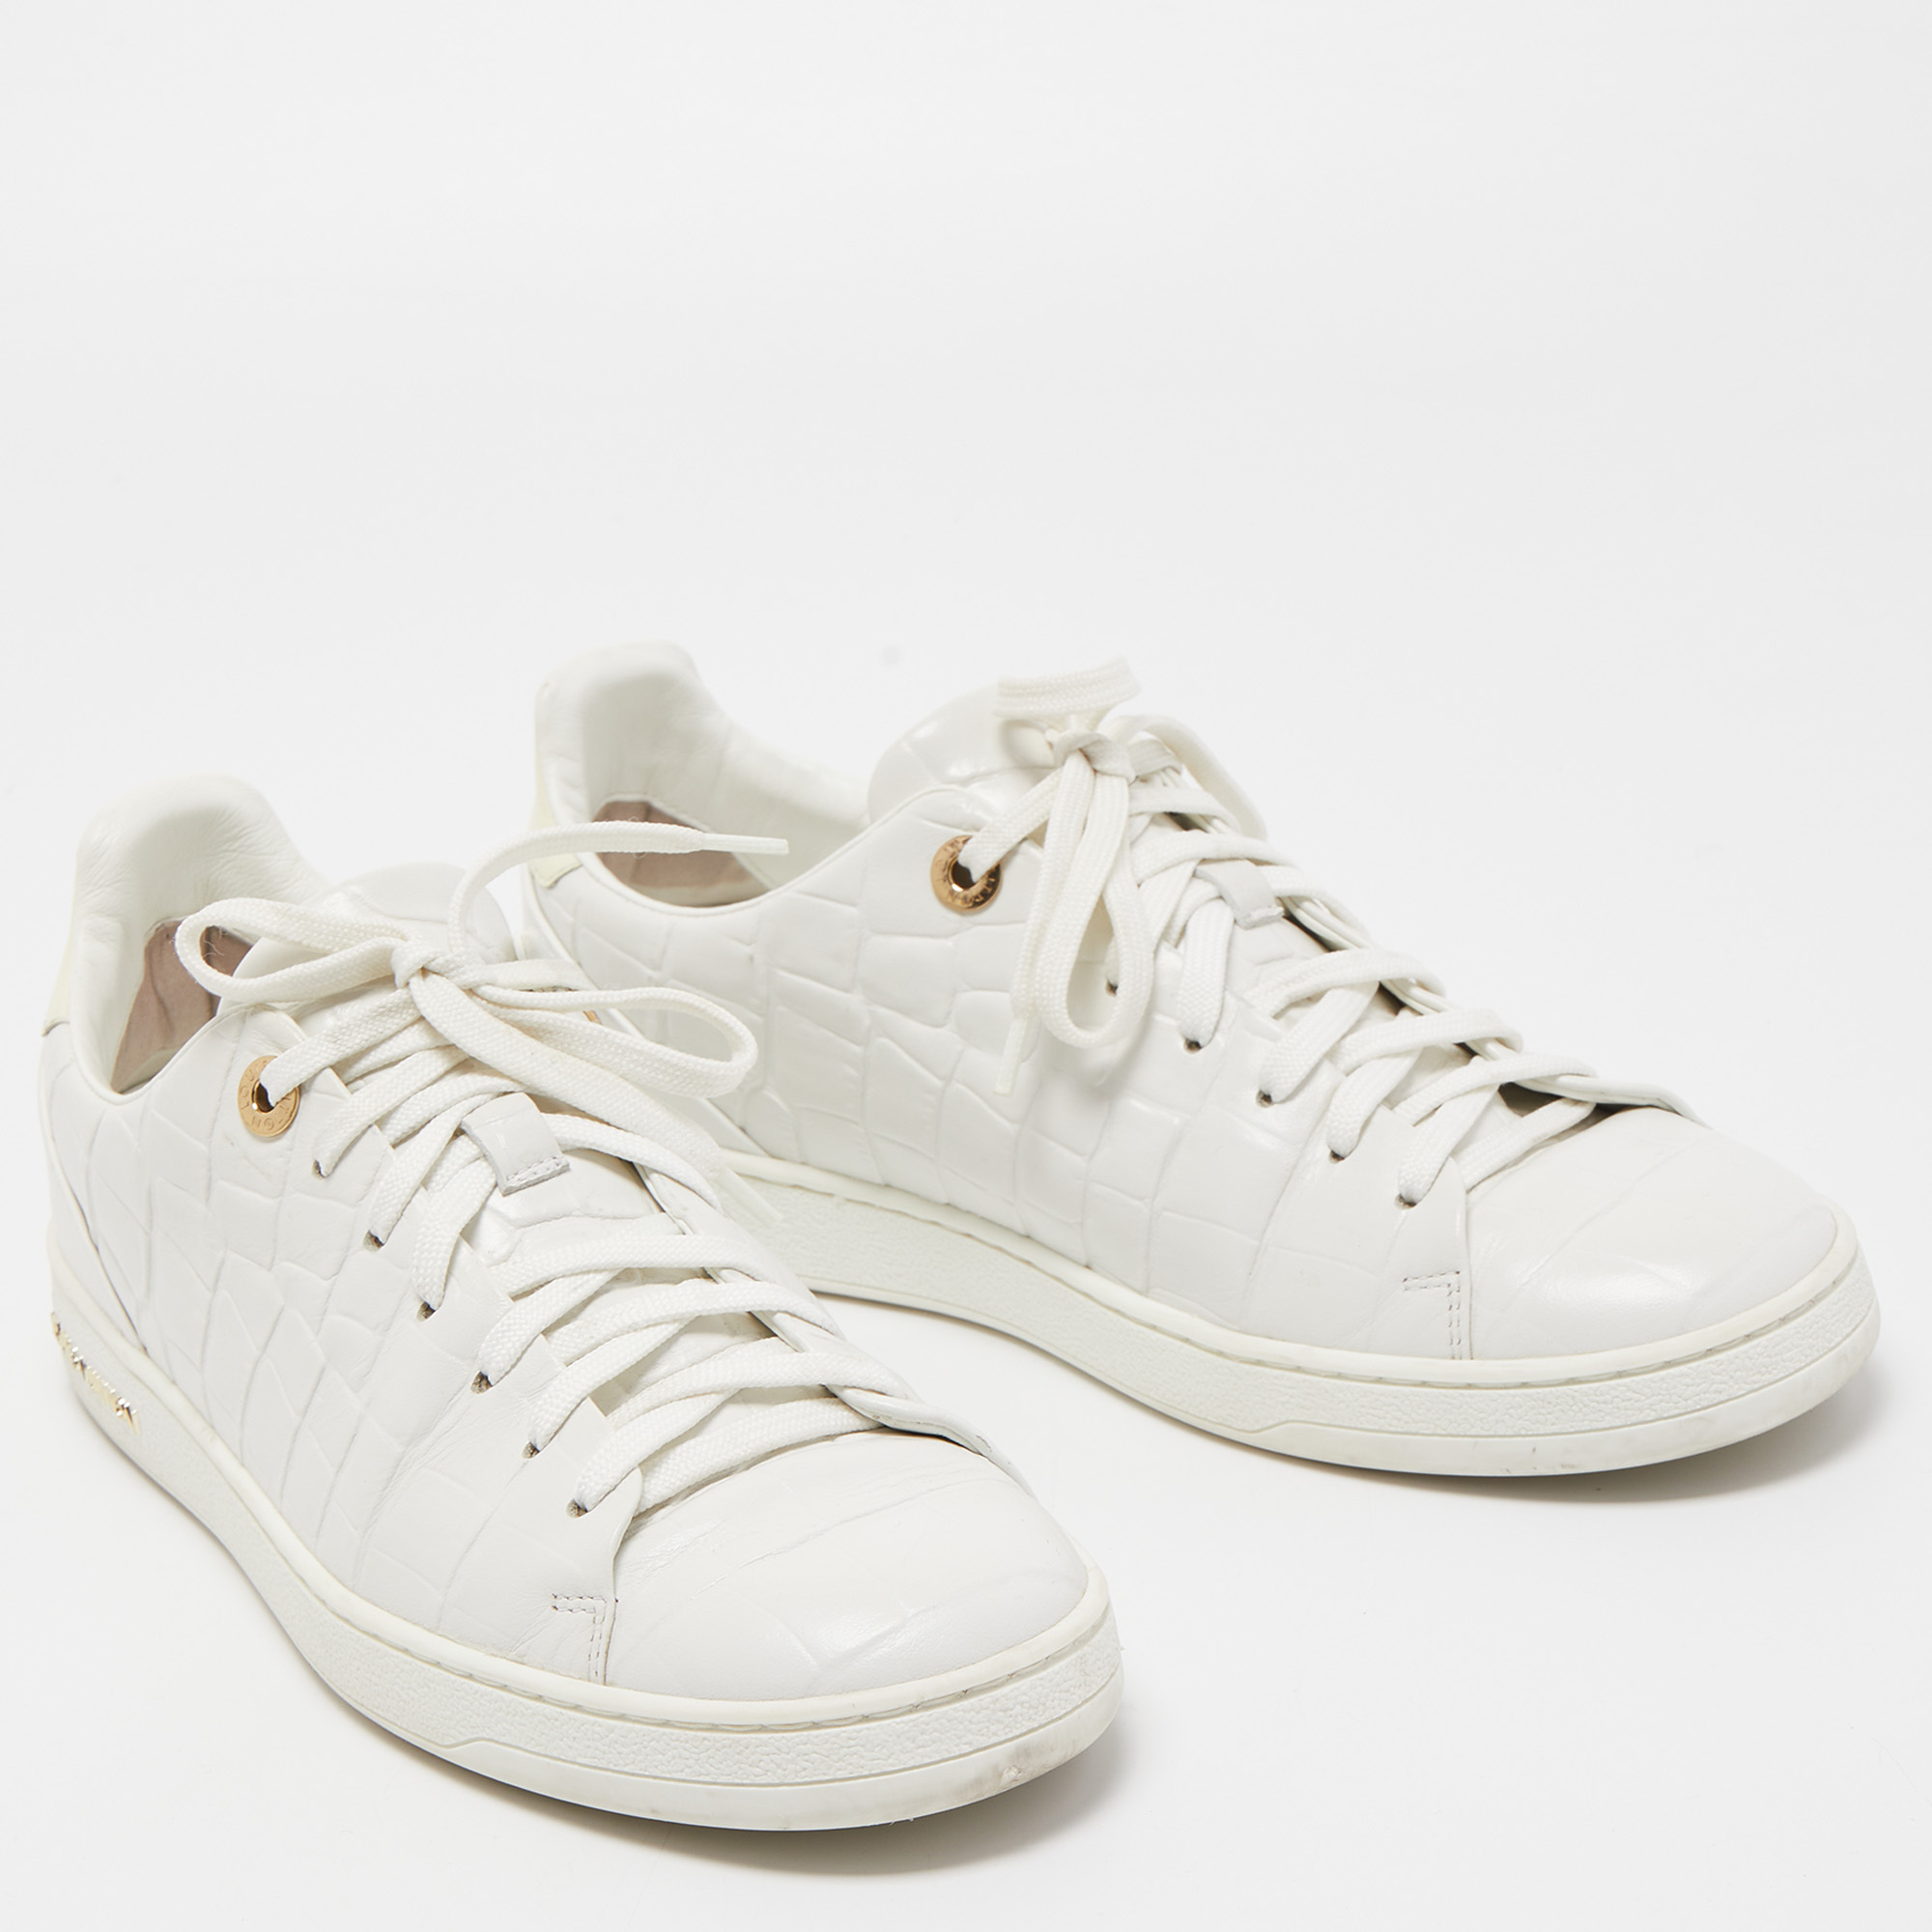 Louis Vuitton White Croc Embossed Leather Frontrow Sneakers Size 38.5